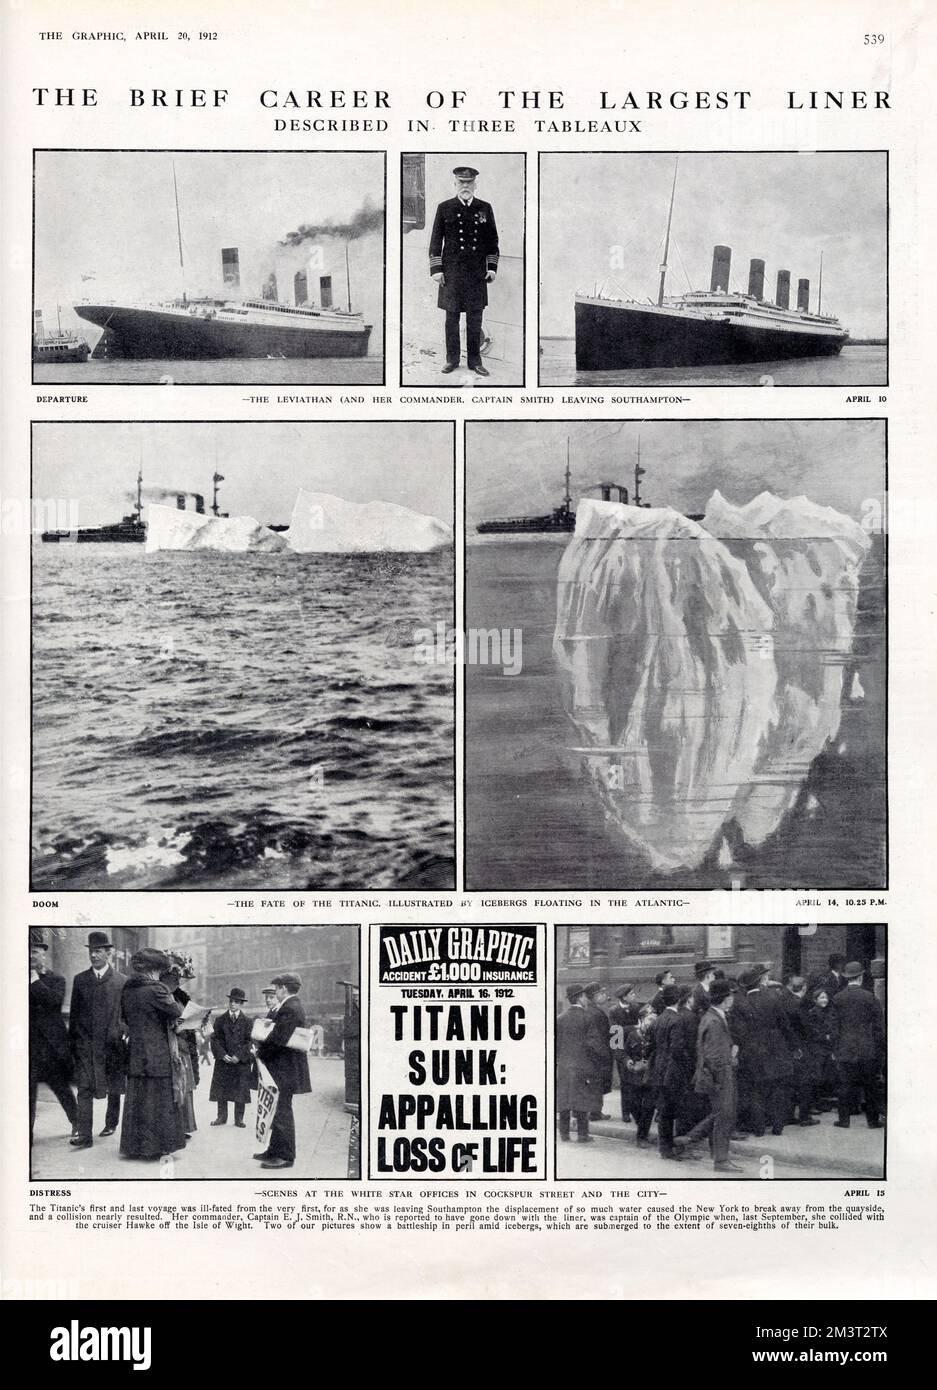 The brief career of the largest liner, described in three tableaux. Departure of the Titanic from Southampton on 10th April 1912; doom - the fate of the Titanic illustrated by icebergs floating in the Atlantic on 14th April; distress - scenes at the White Star offices in Cockspur Street and the City. Stock Photo